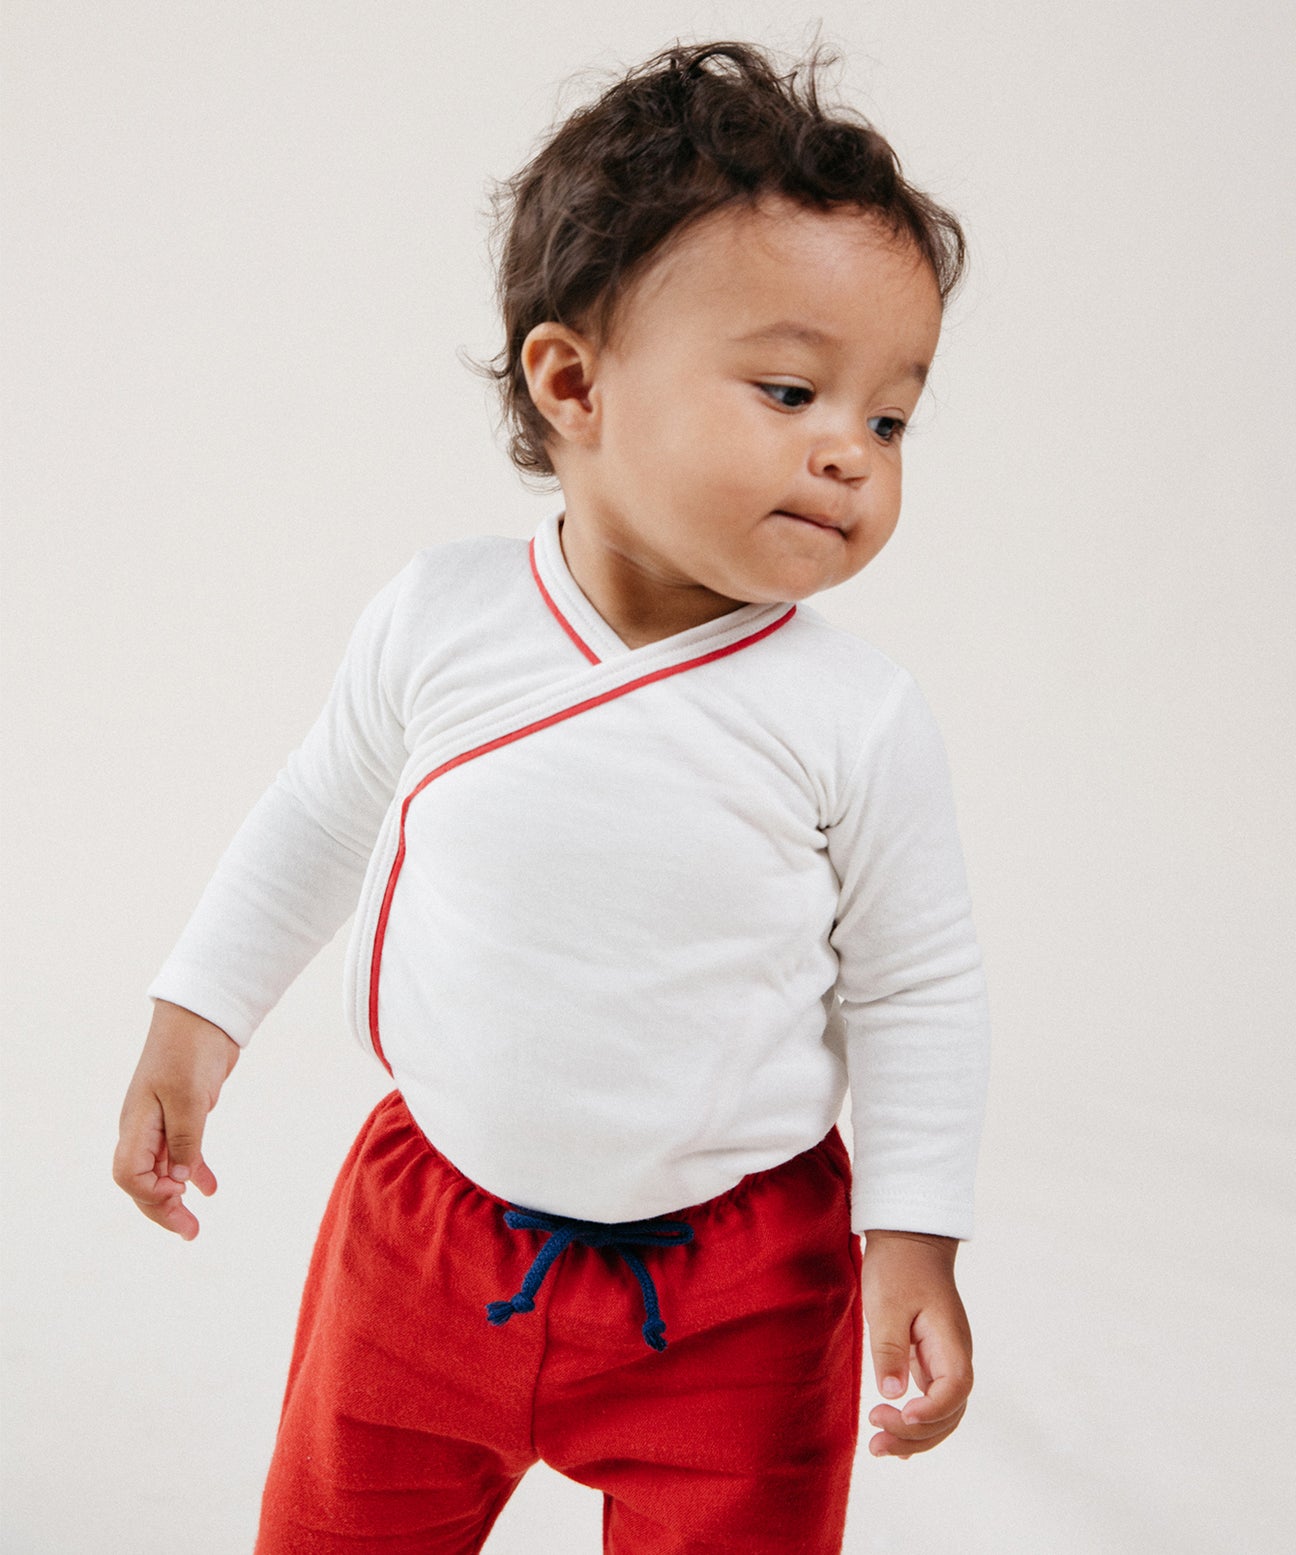 Newborn Clothing and Baby Clothing | Oso & Me